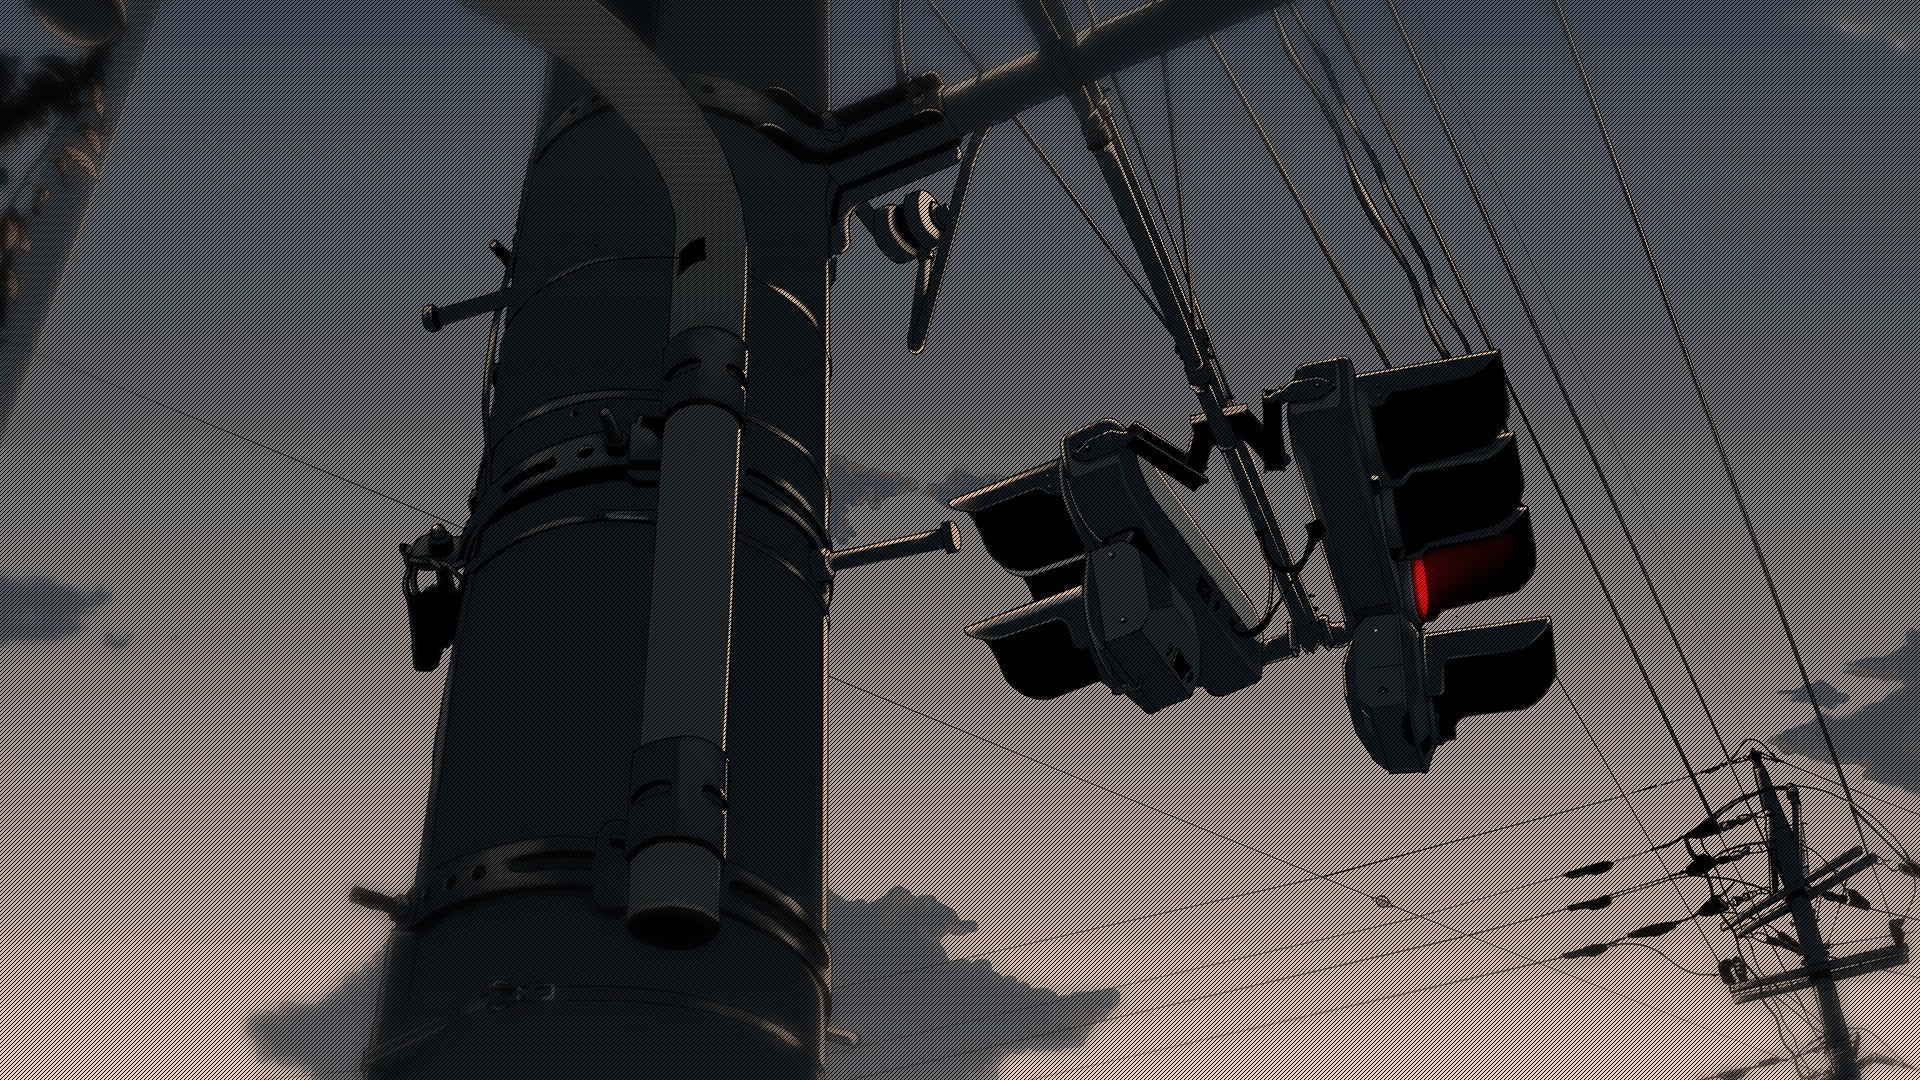 A red traffic light hanging from a pole. - 1920x1080